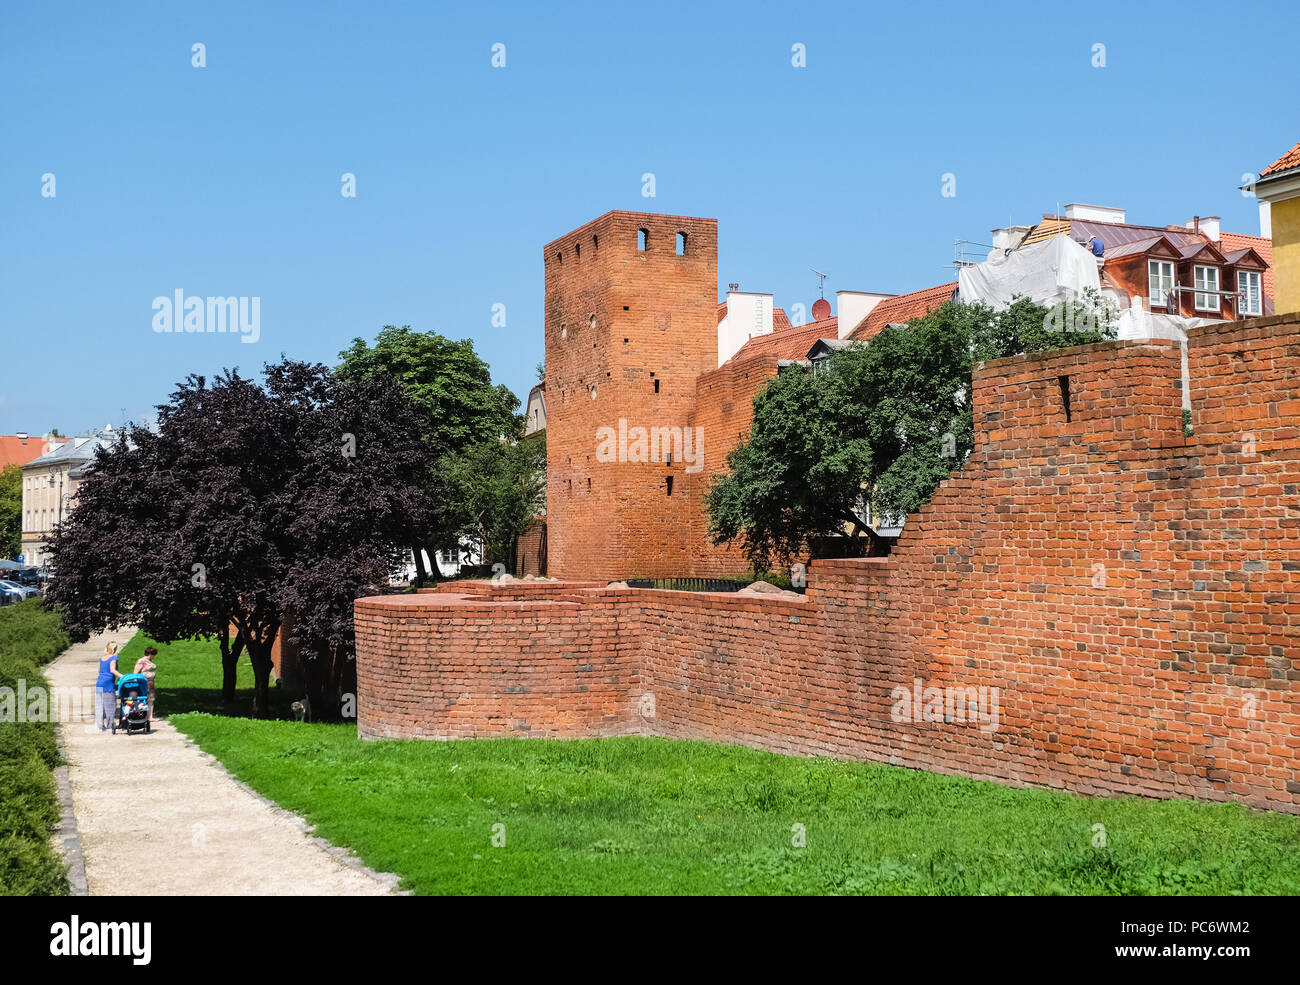 Warsaw, Poland - July 19, 2018: Red walls of a castle in an old town of Warsaw, Poland. Stock Photo